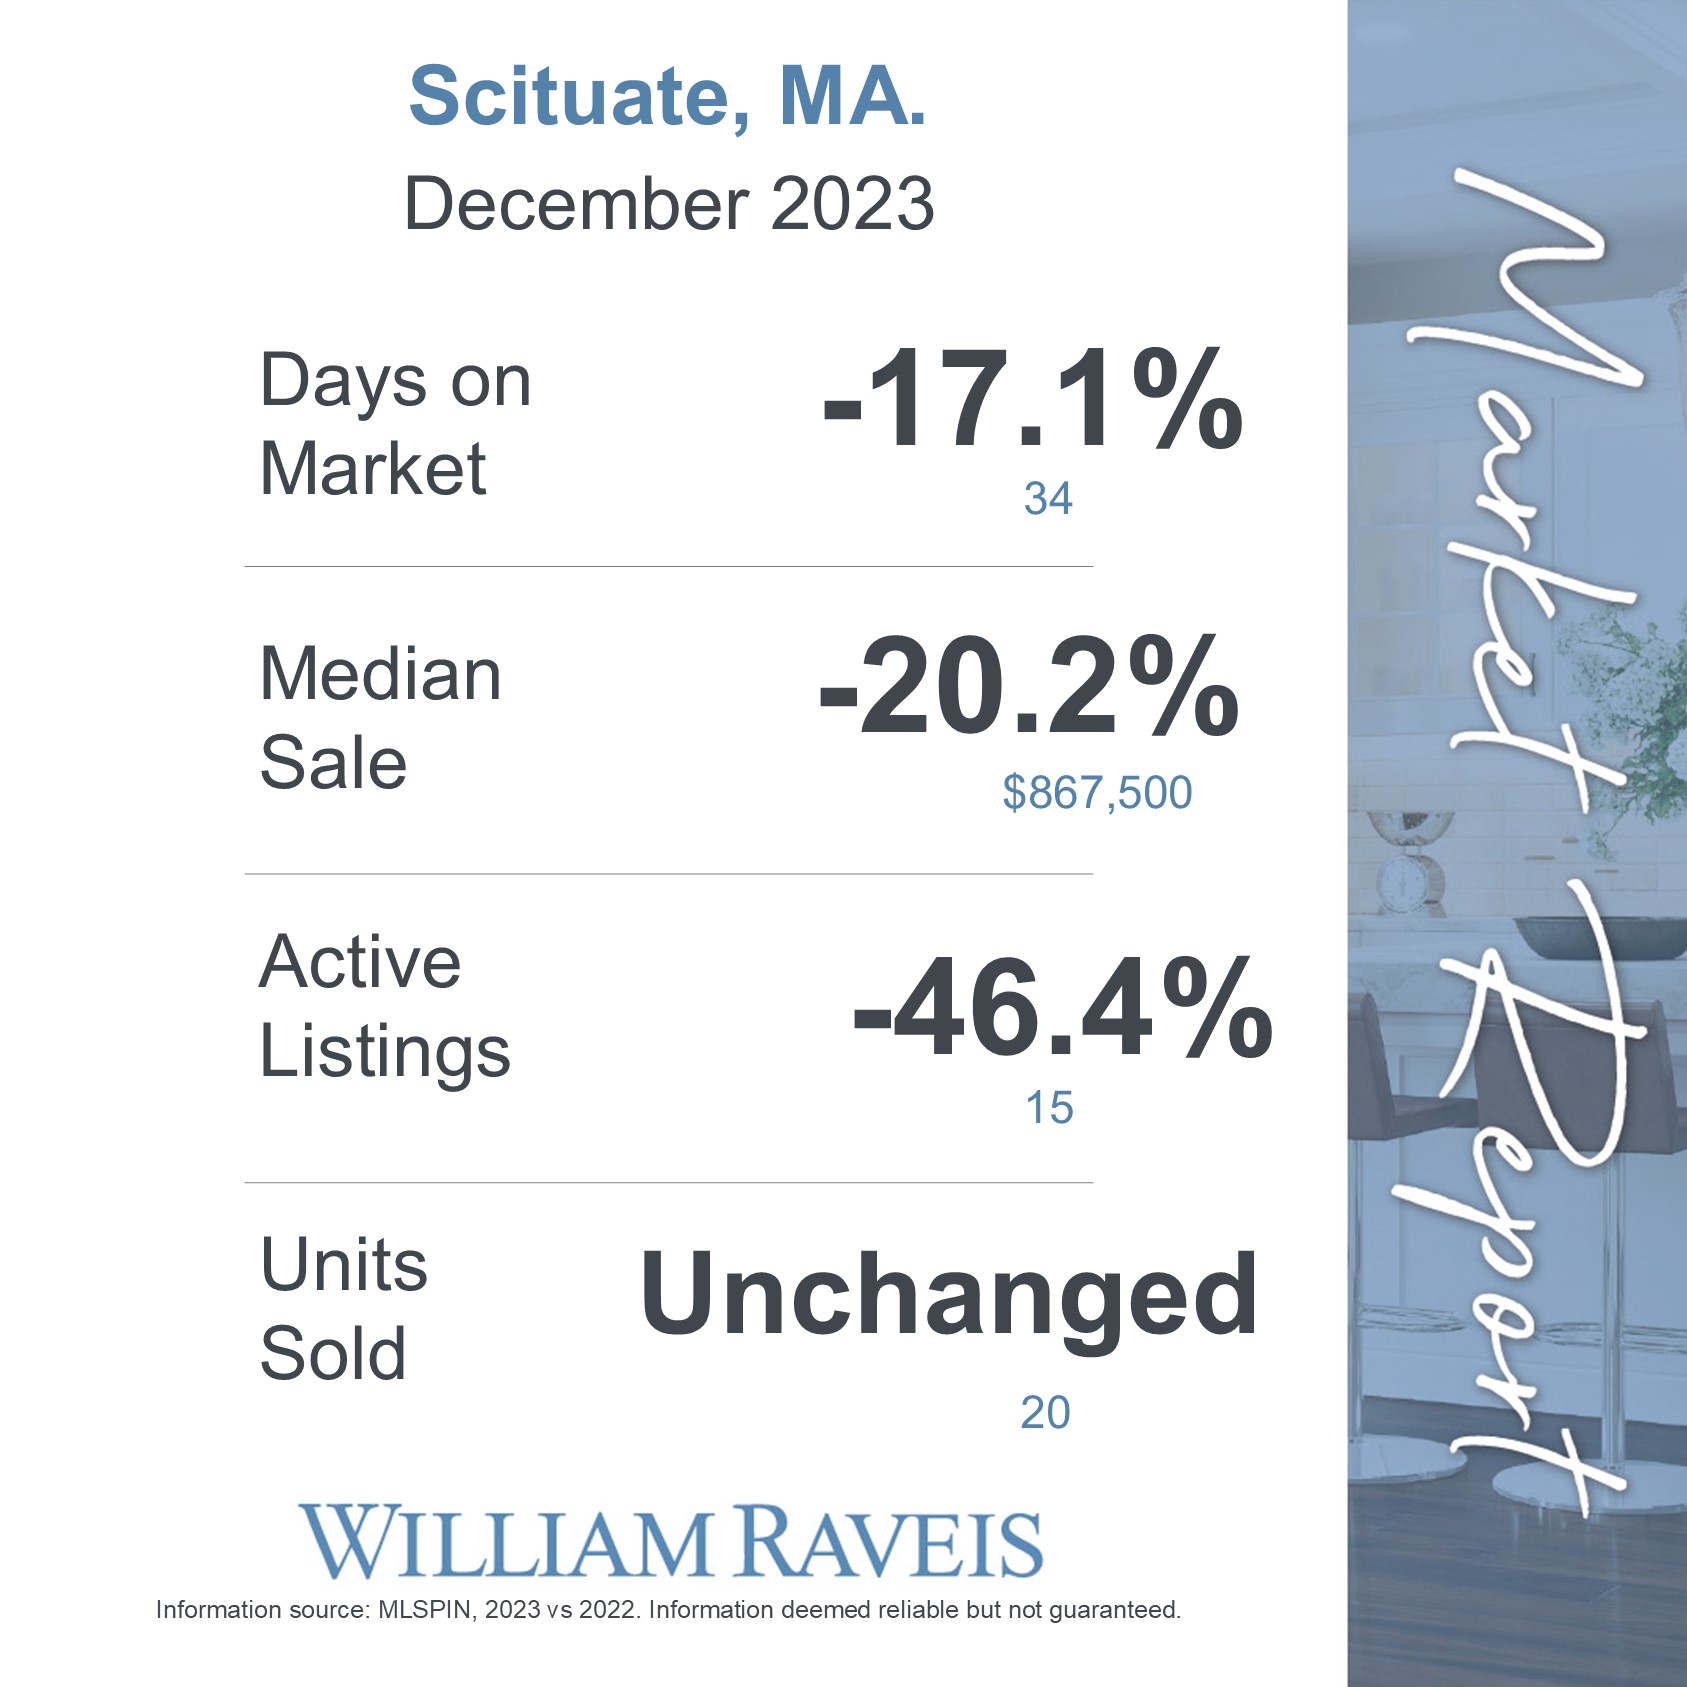 The Scituate MA real estate market report